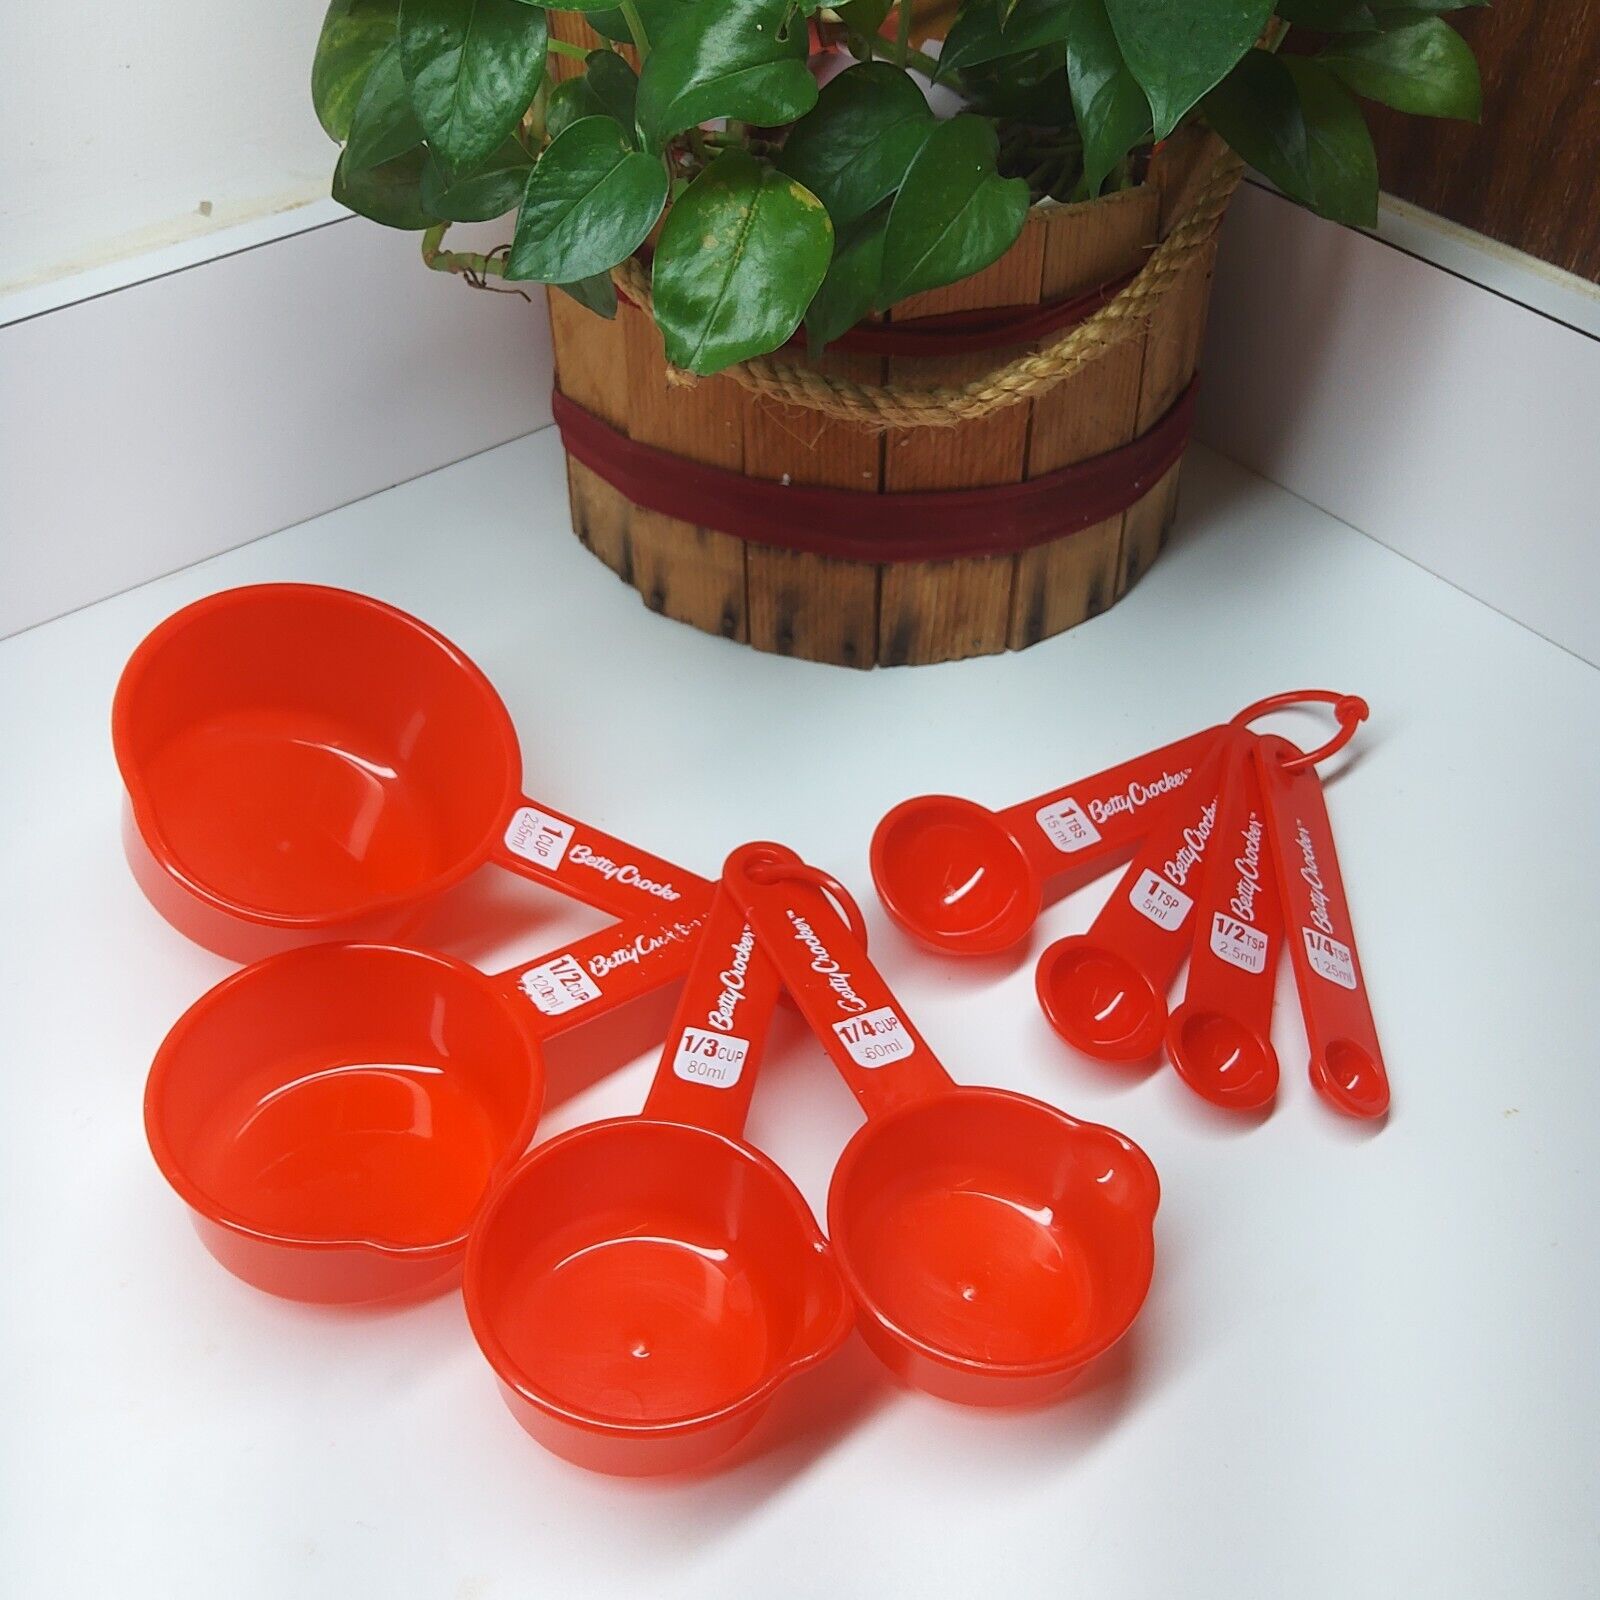 Betty Crocker Combination set of measuring Cups And Spoons Red